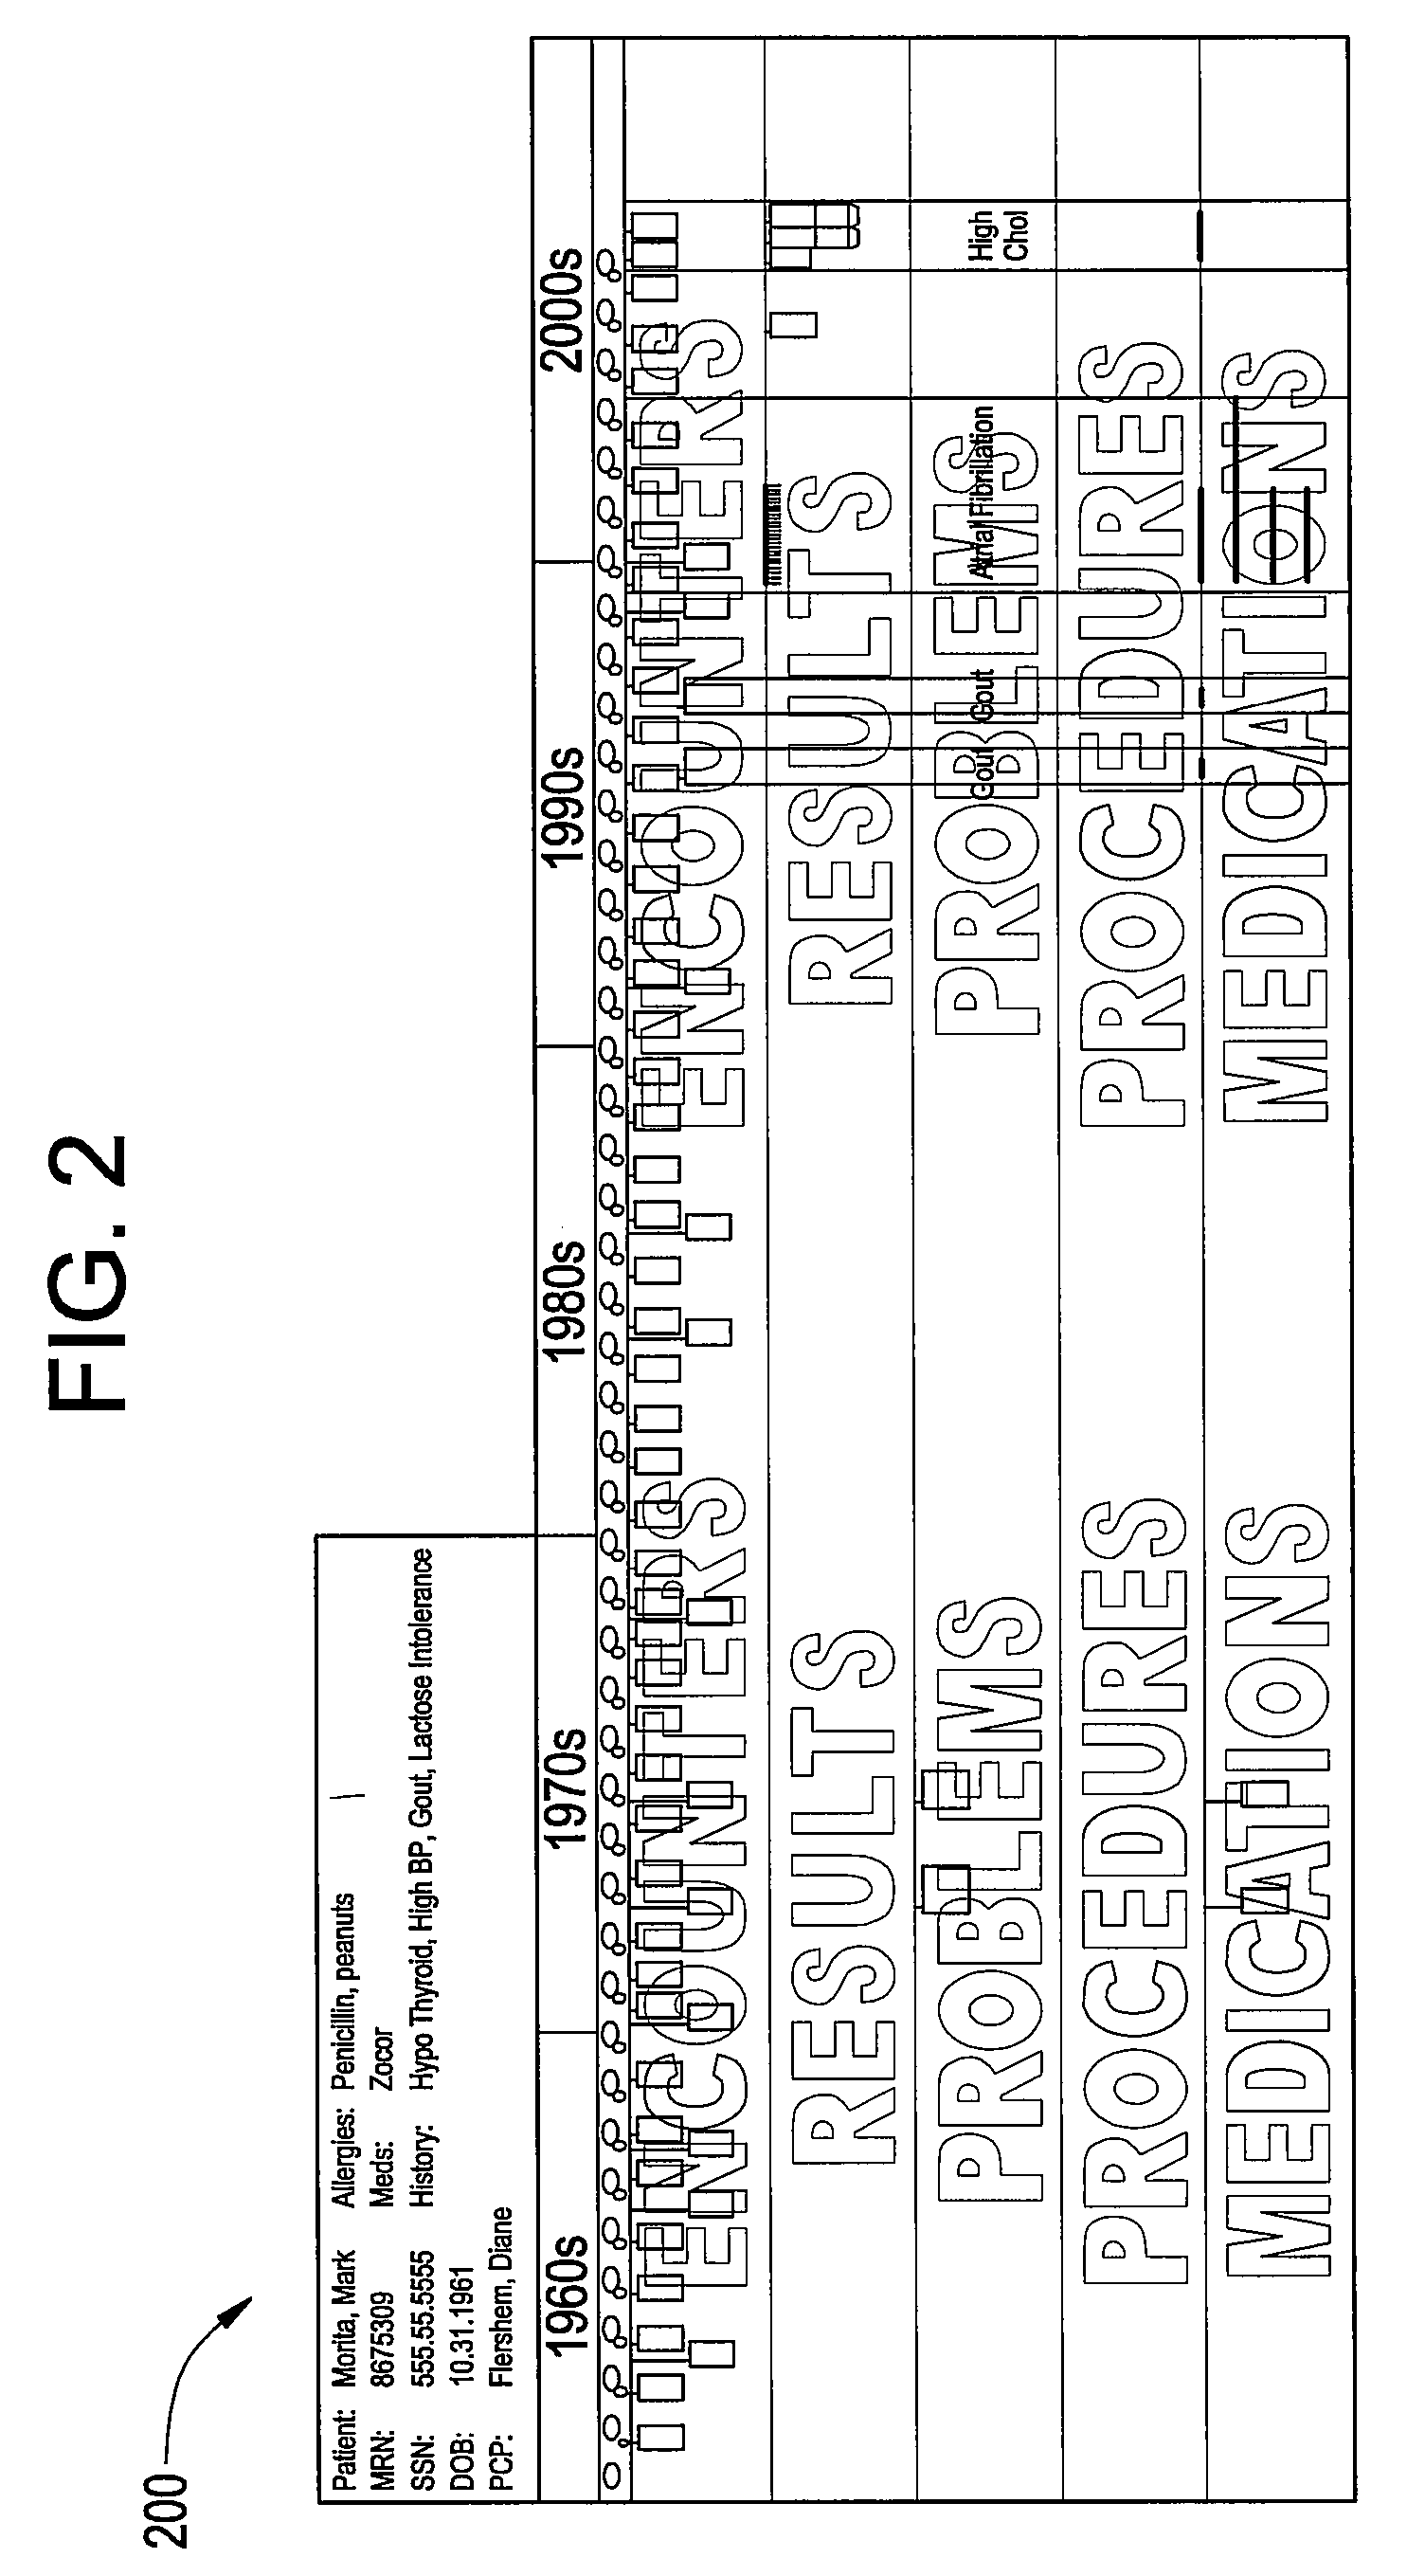 Methods and systems for providing clinical documentation for a patient lifetime in a single interface